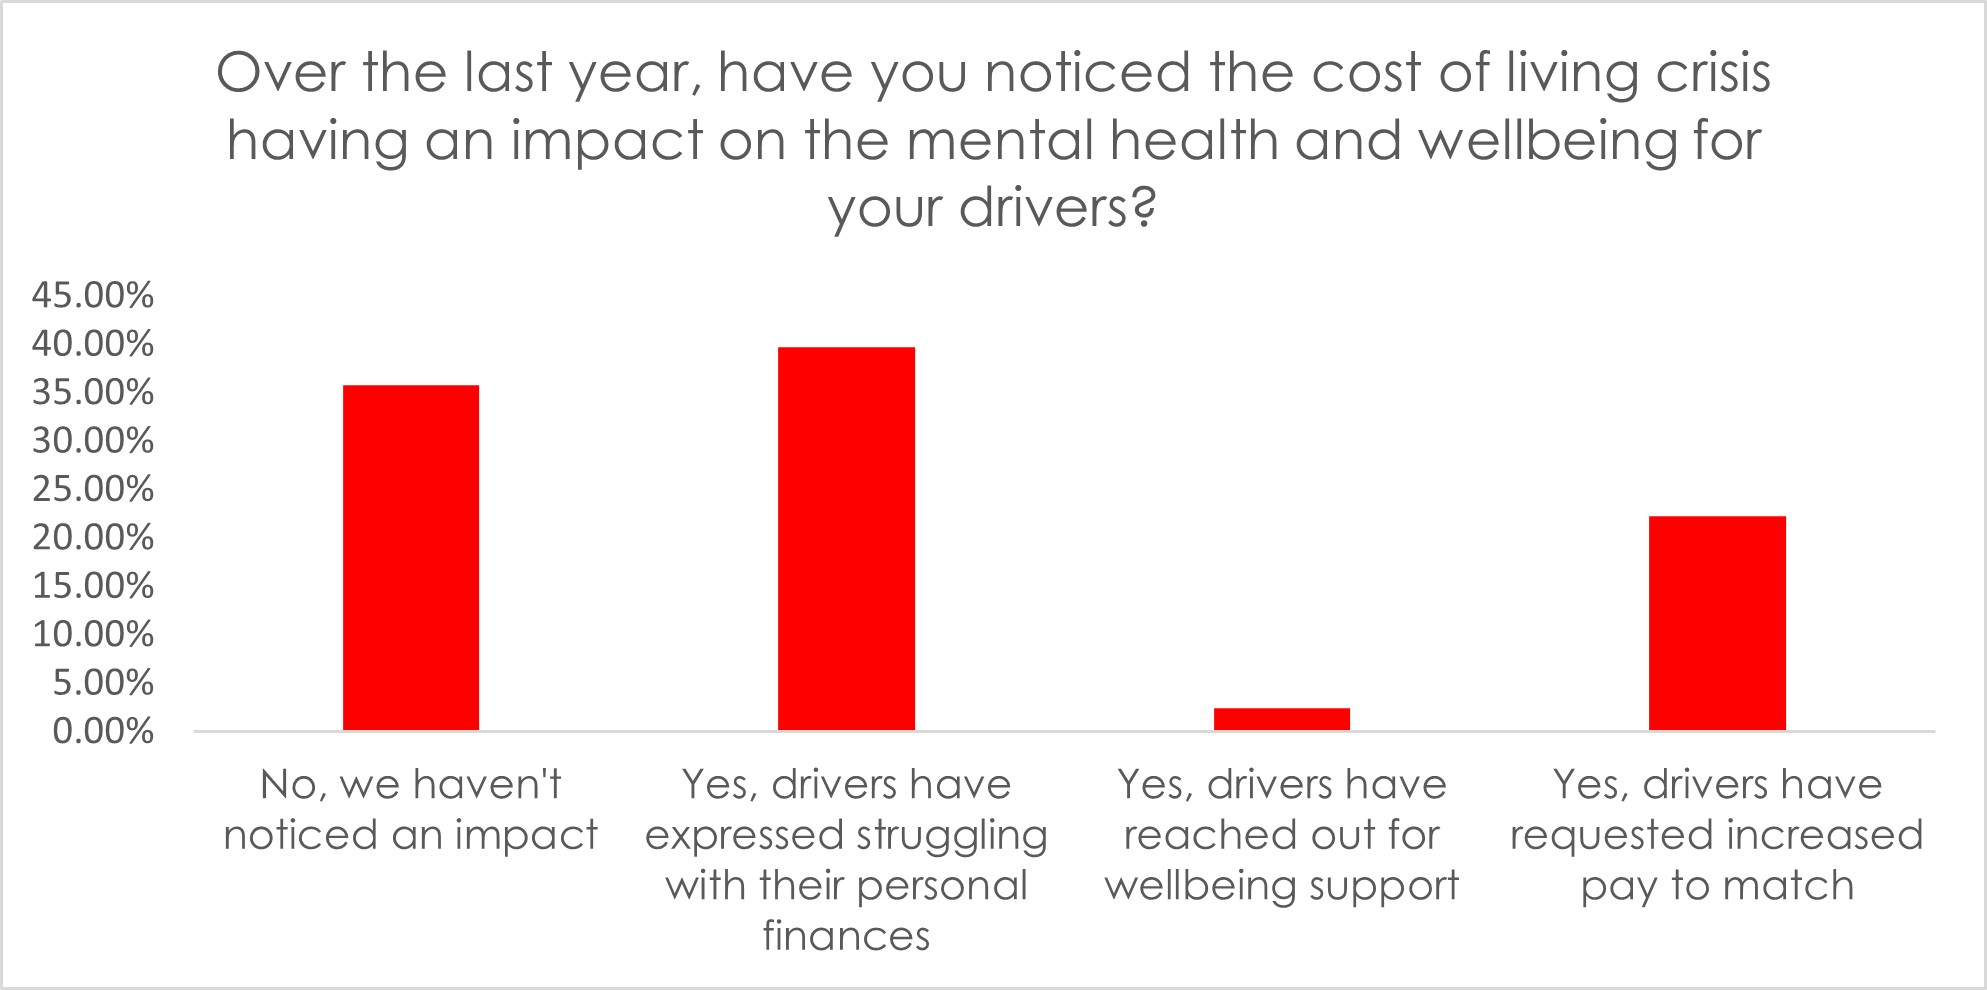 Graph showing living crisis impact on mental health of drivers